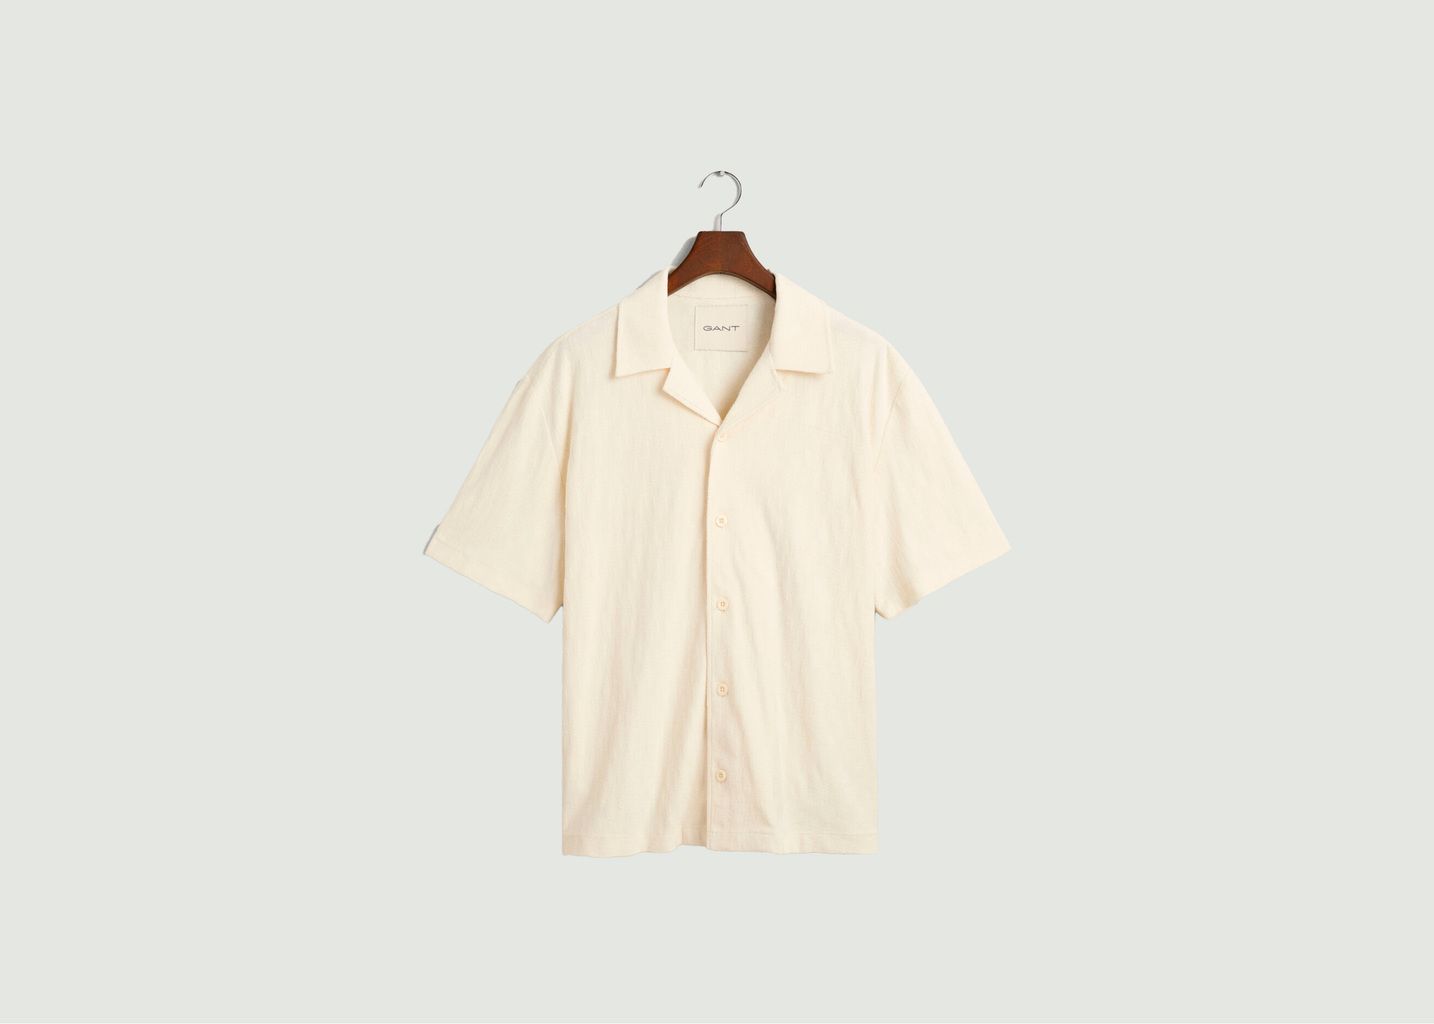 Gant Relaxed Fit Textured Jacquard Blouse